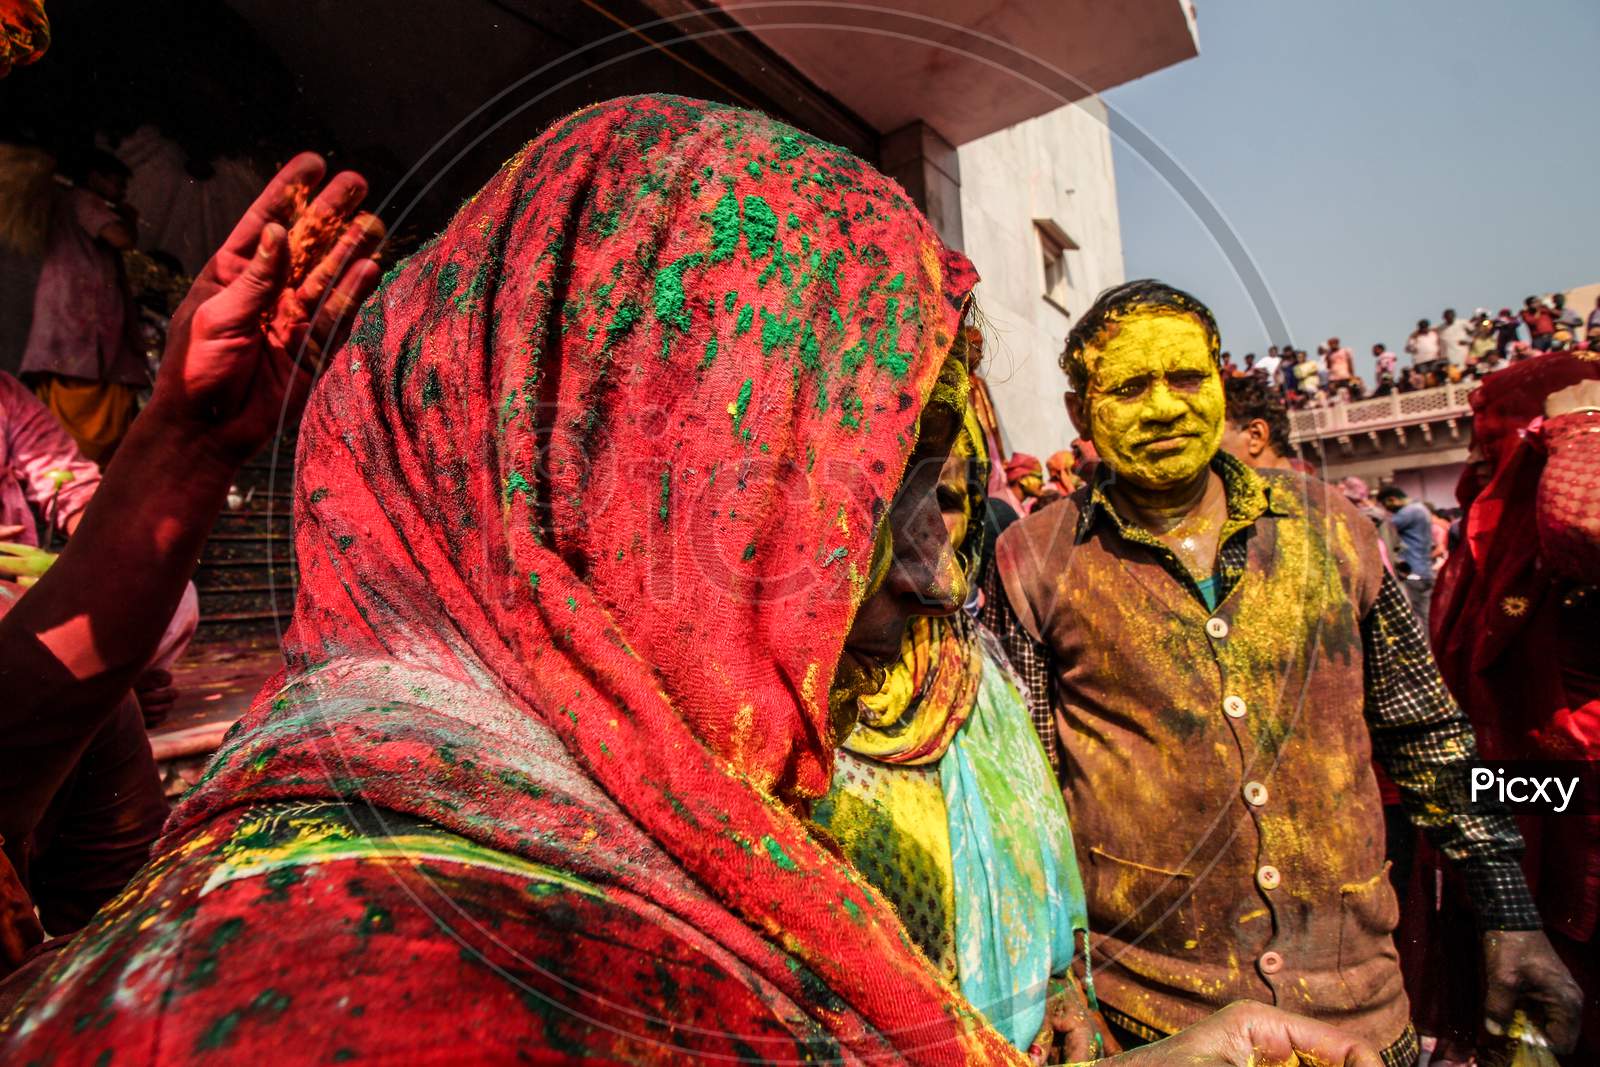 Mathura, Uttar Pradesh/ India- January 6 2020: : Woman Dance Performing At Holi Festival Wearing Traditional Dress People Looking Her,Throwing Color And Clicking Photos.